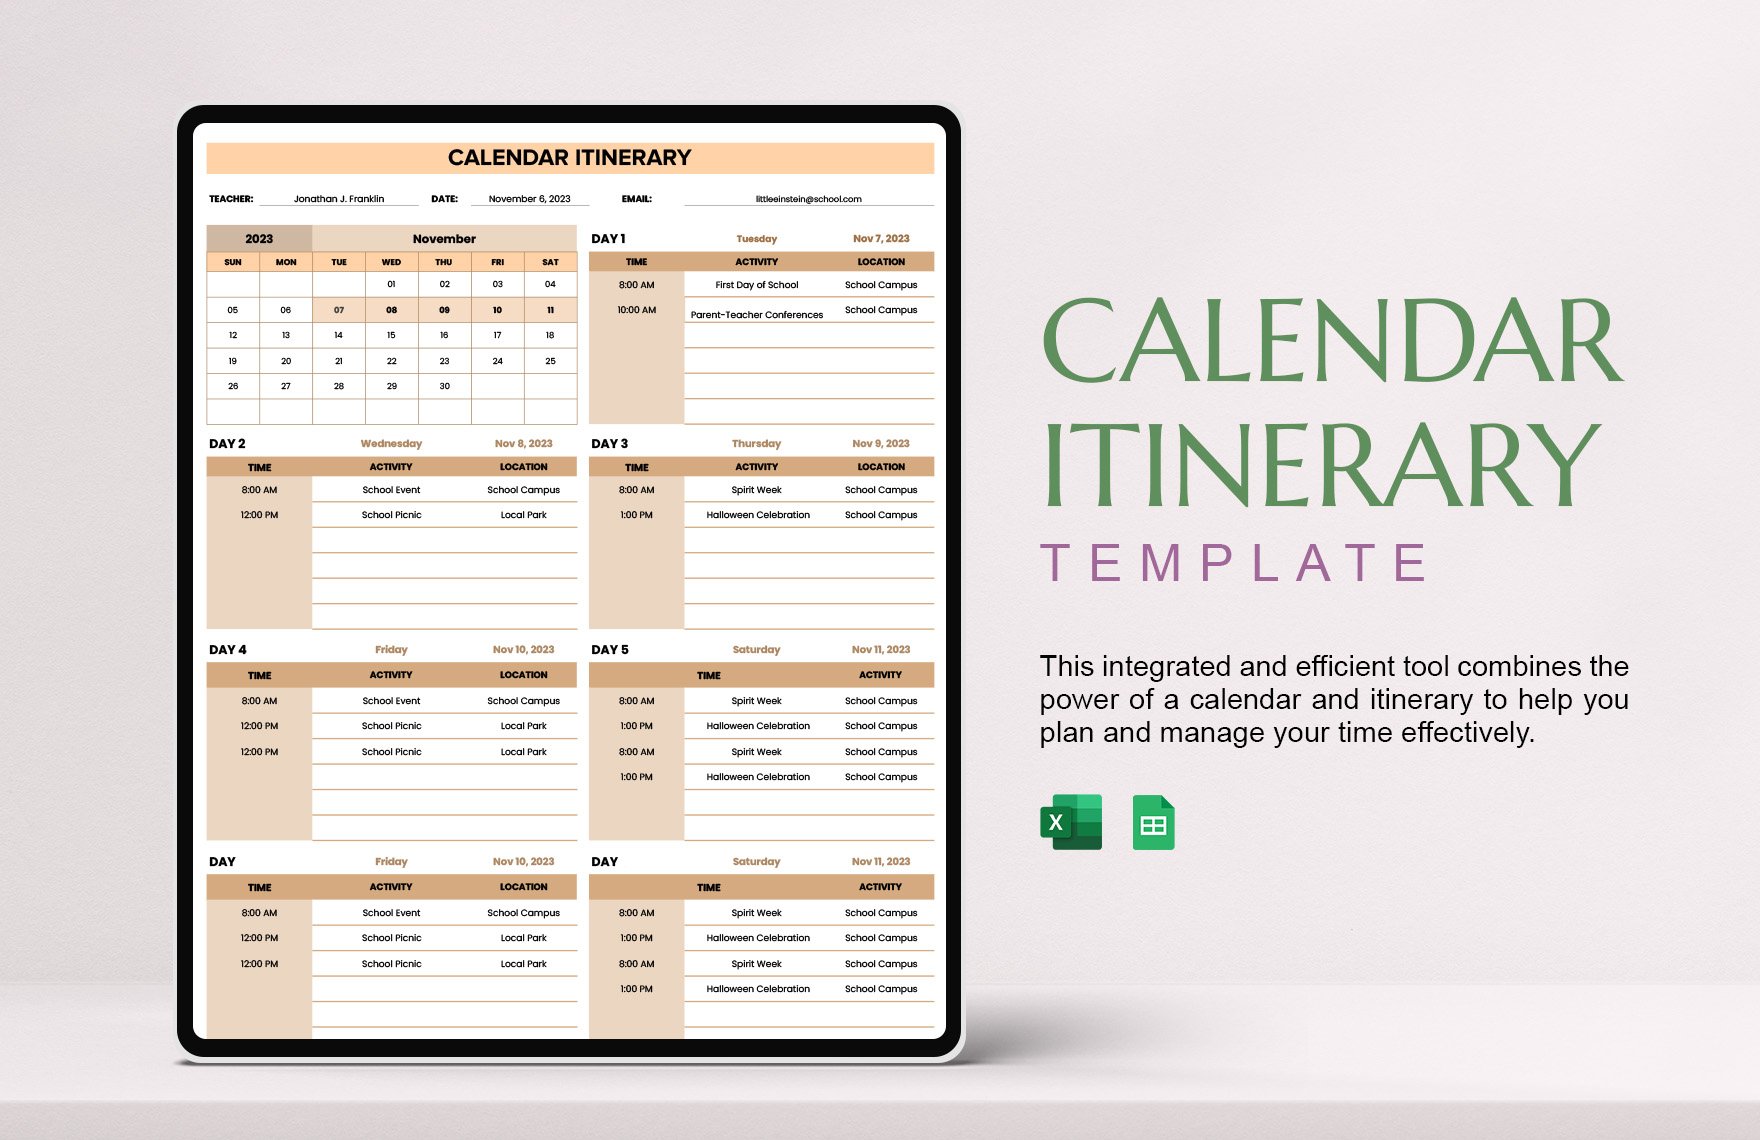 Free Calendar Itinerary Template in Excel, Google Sheets